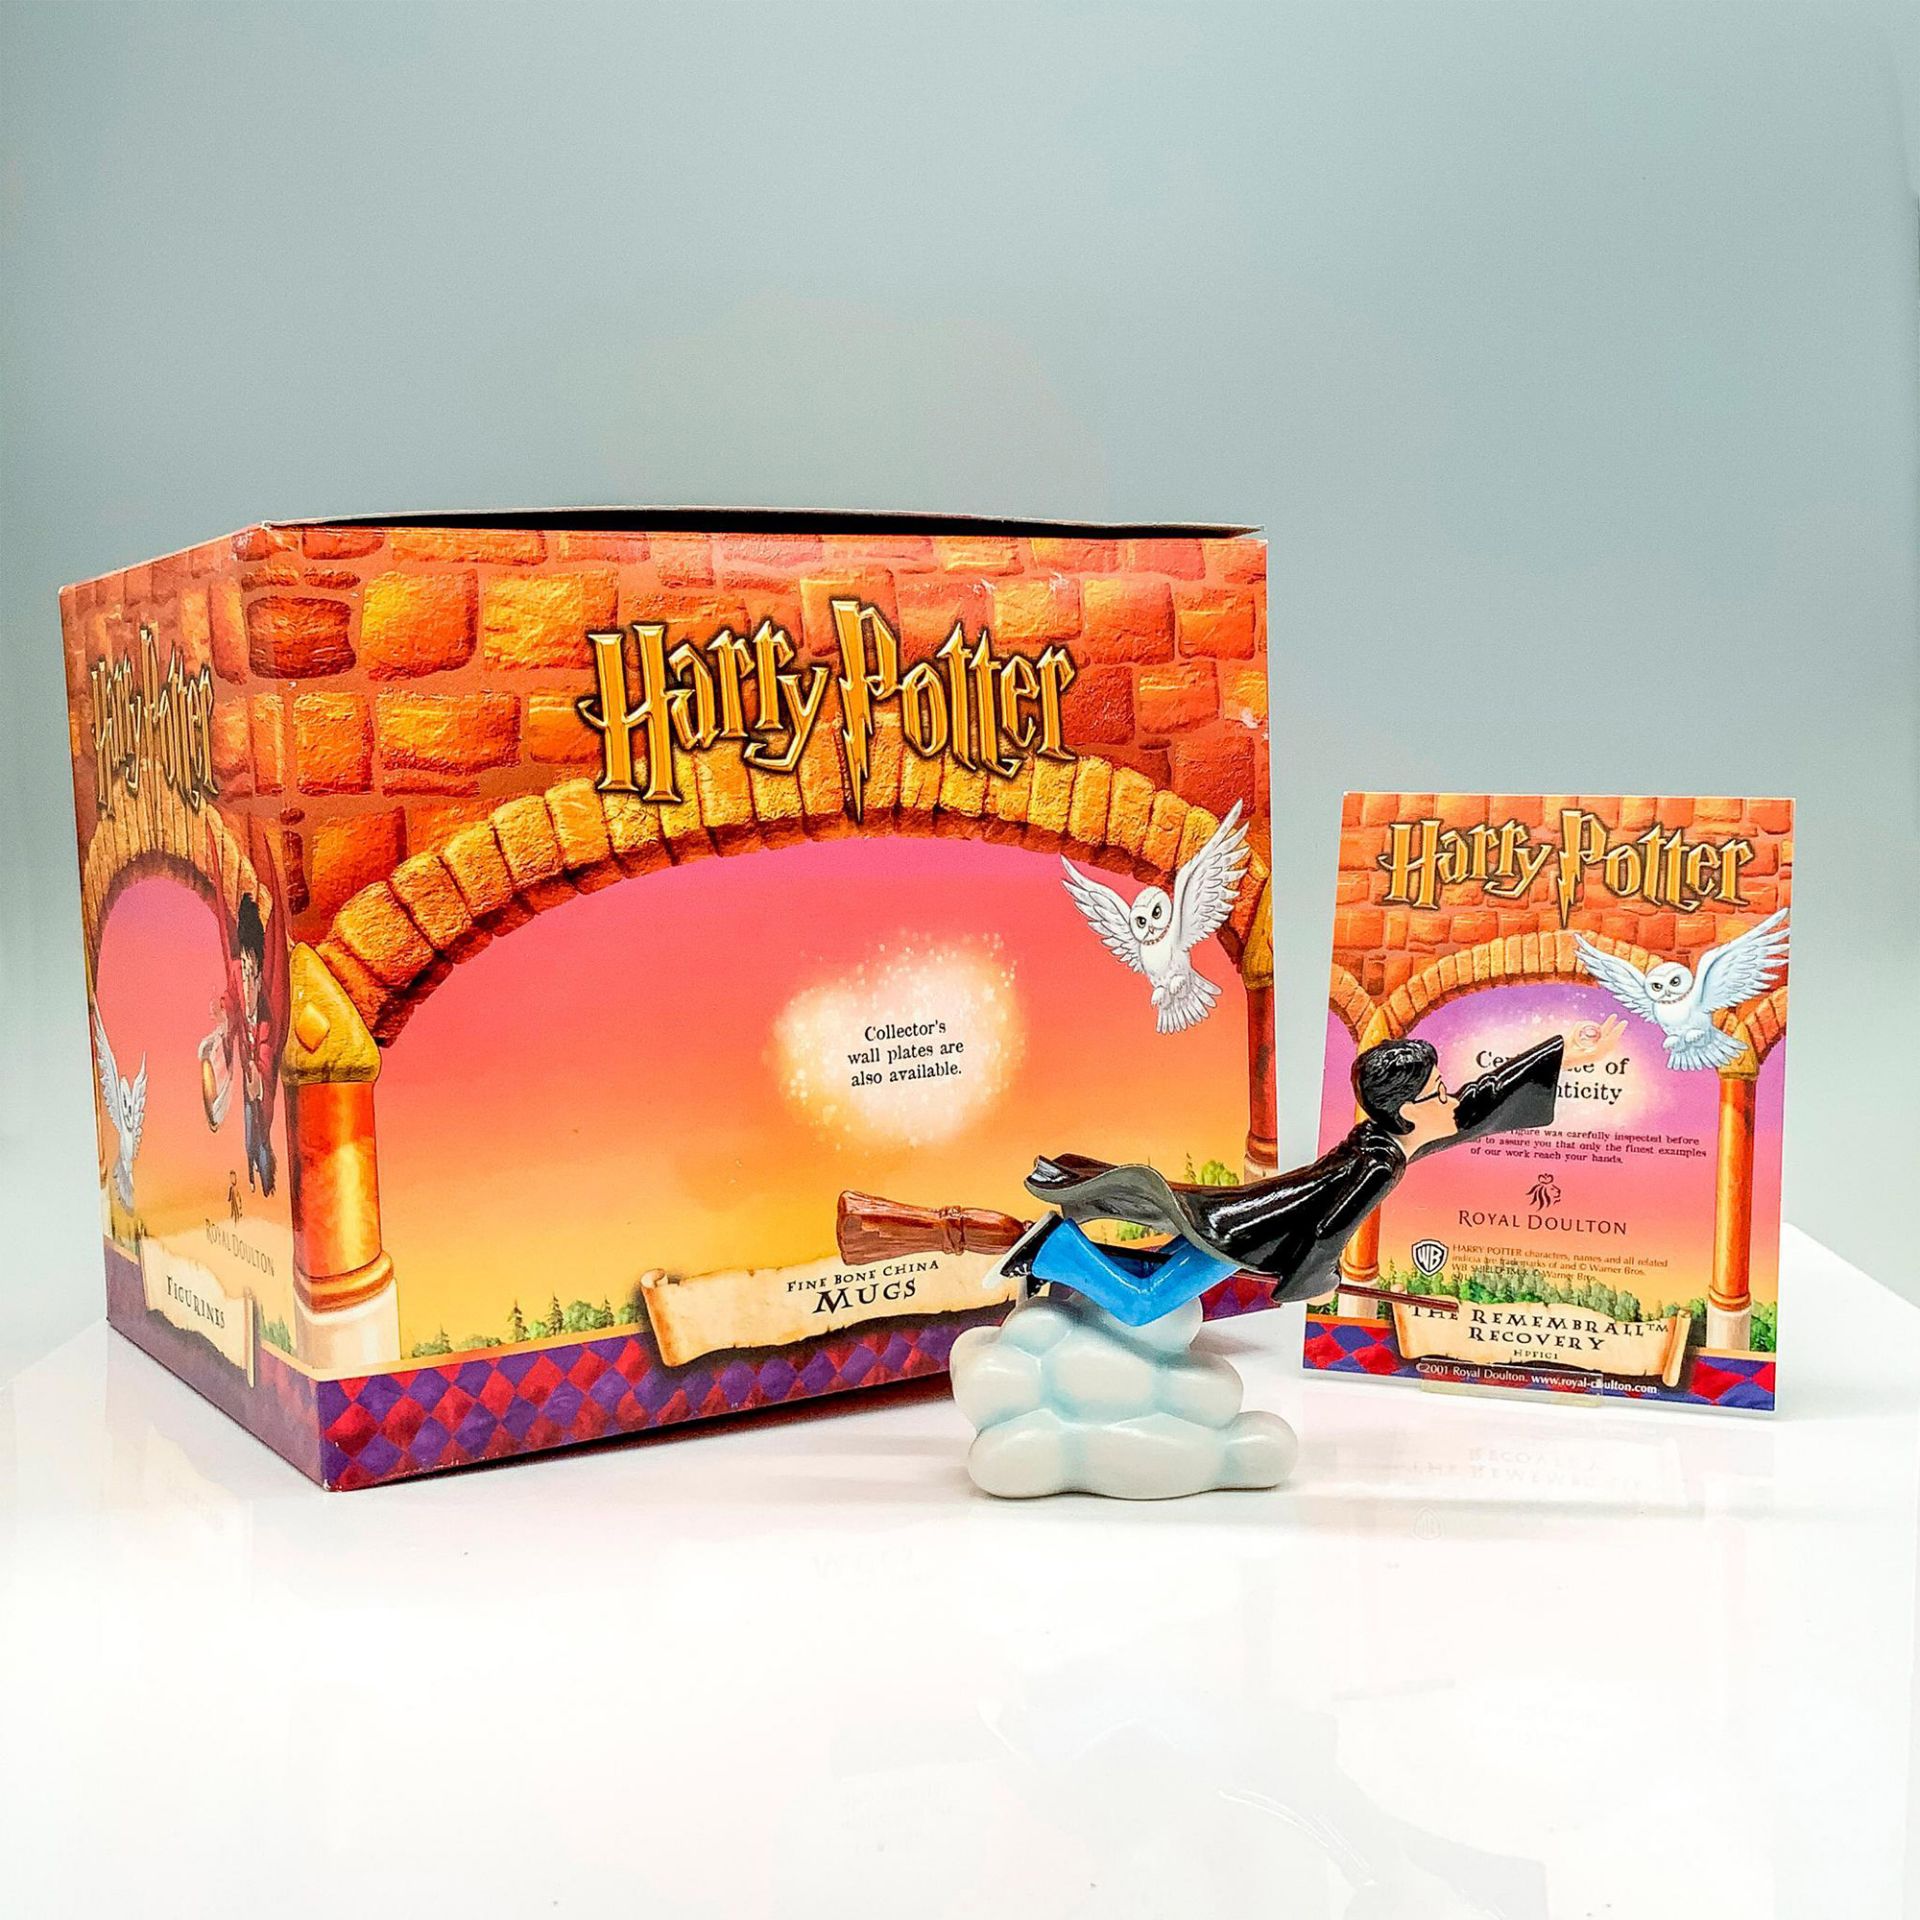 Royal Doulton Harry Potter Figurine, The Remembrall Recovery - Image 4 of 4